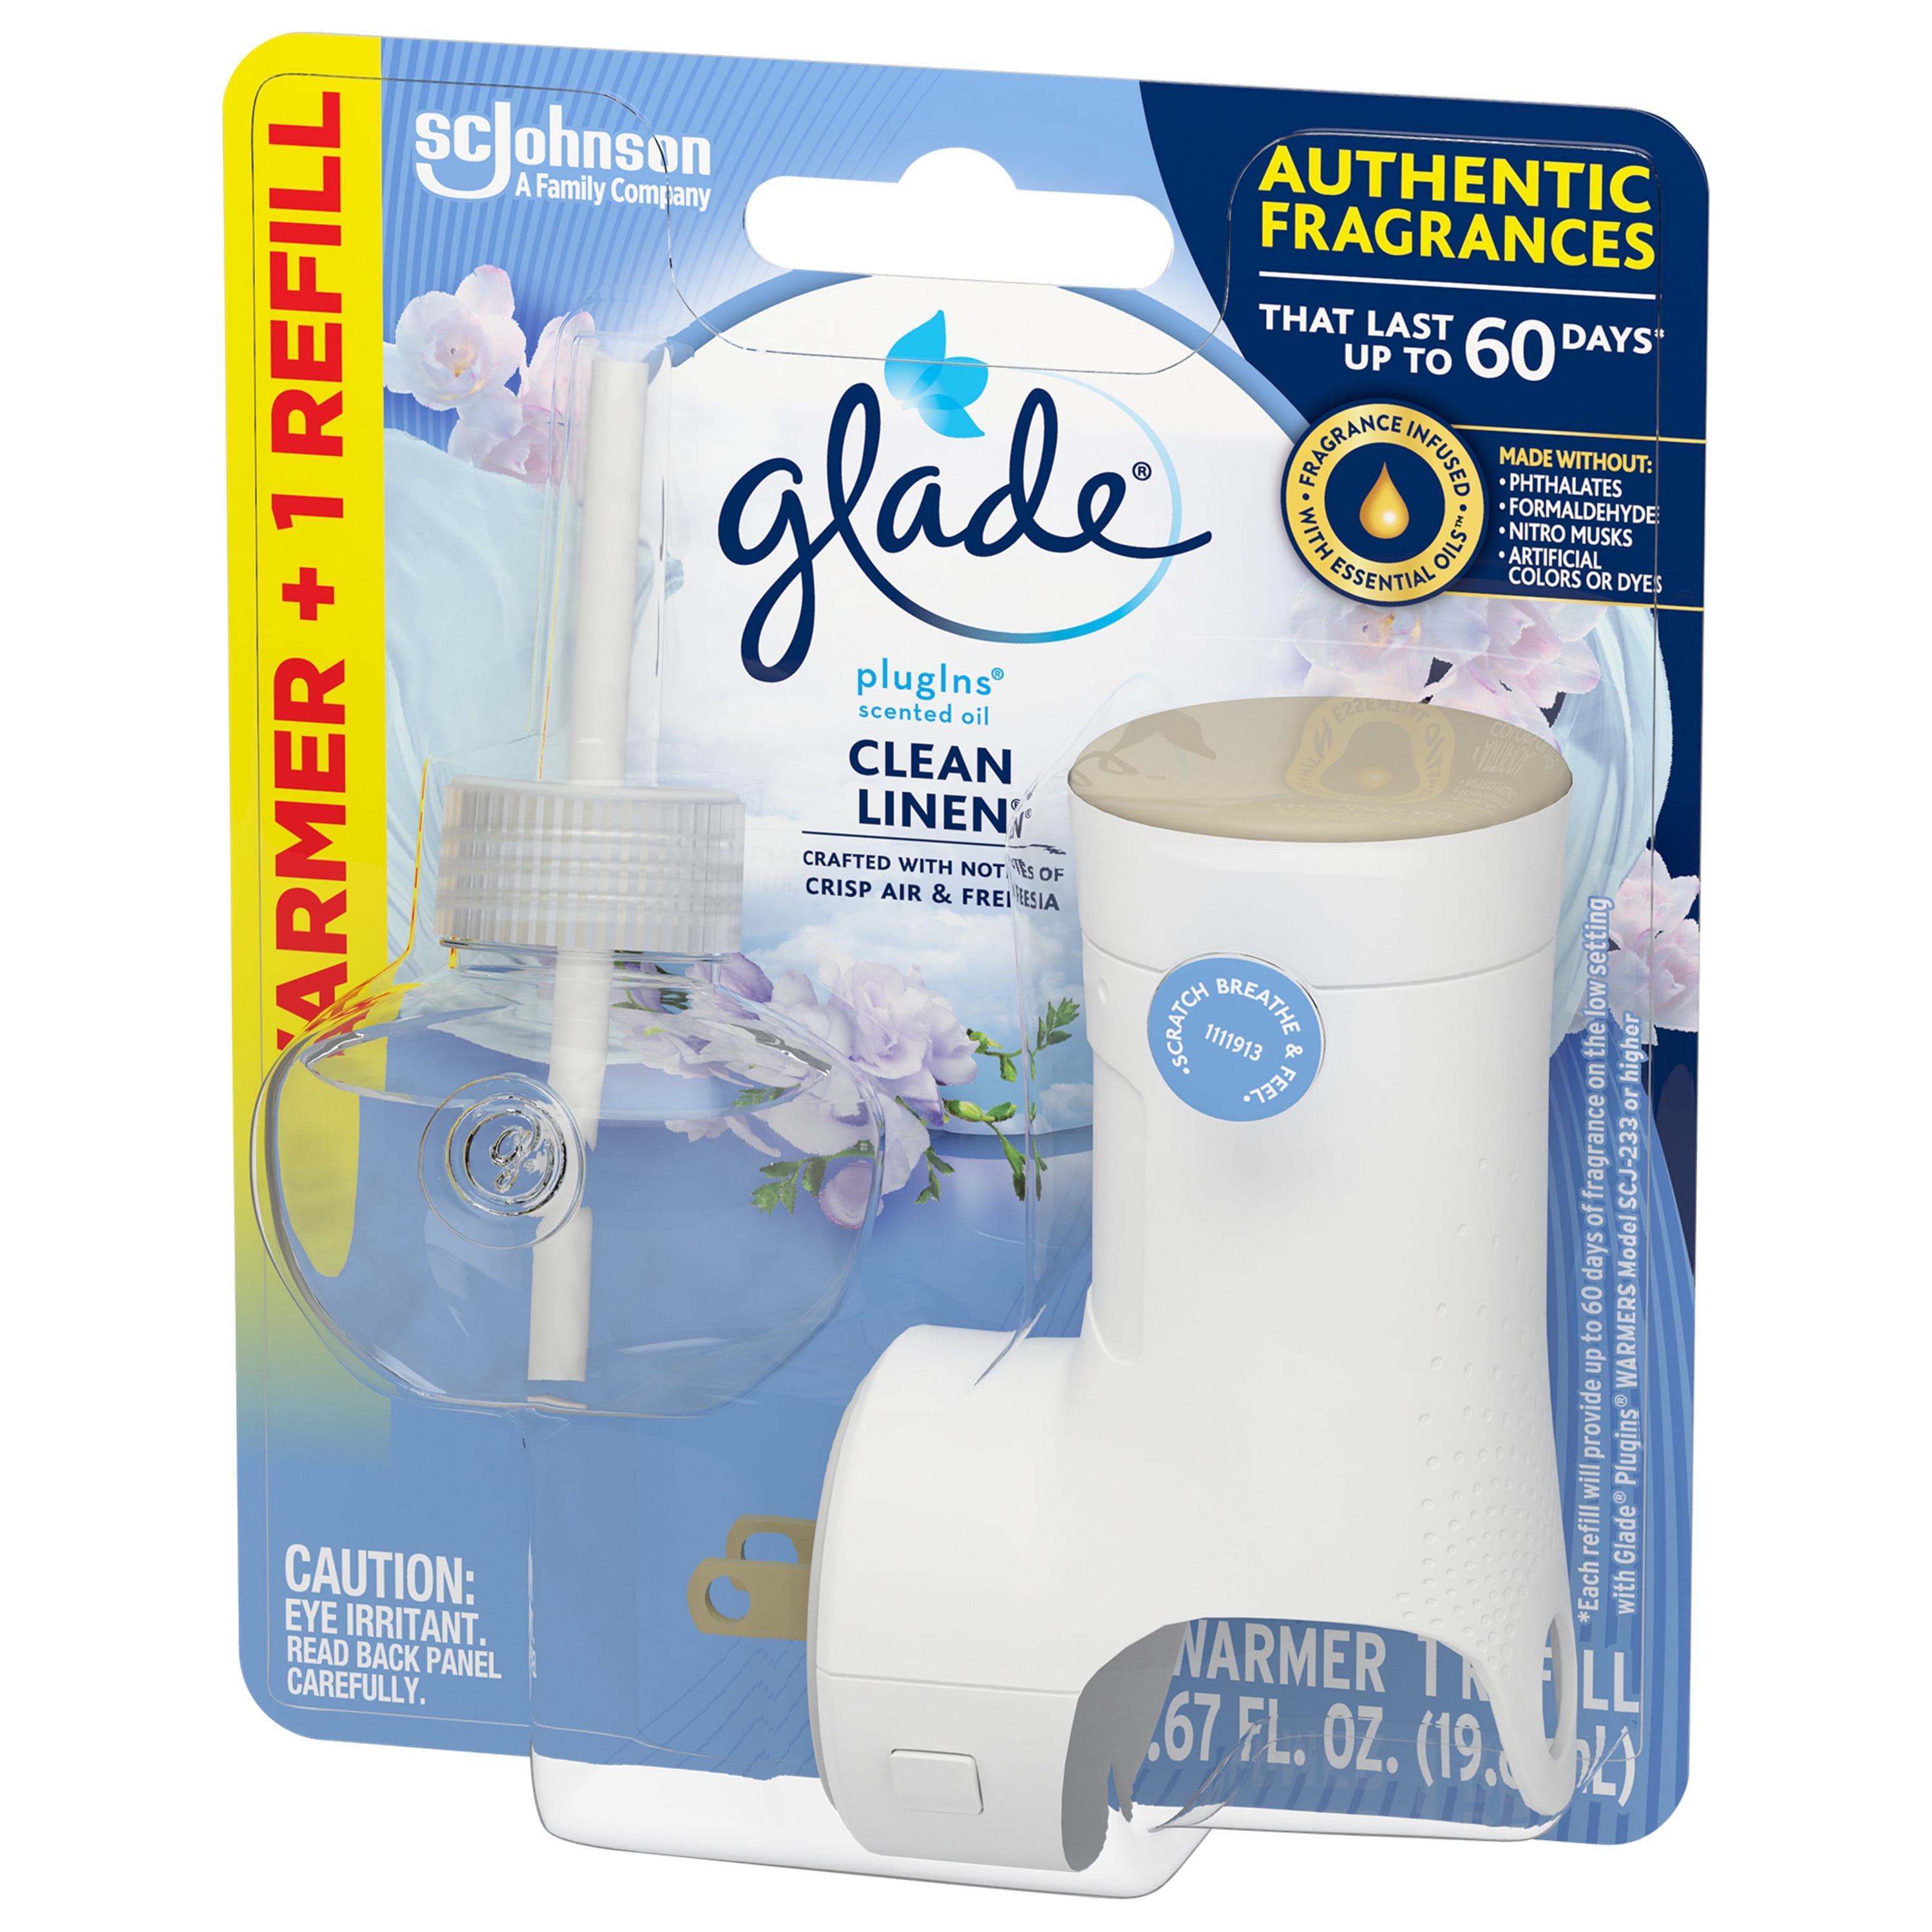 Glade PlugIns Refills Air Freshener Starter Kit, Scented and Essential Oils  for Home and Bathroom, Snow Much Fun, 0.67 Fl Oz, 2 Refills